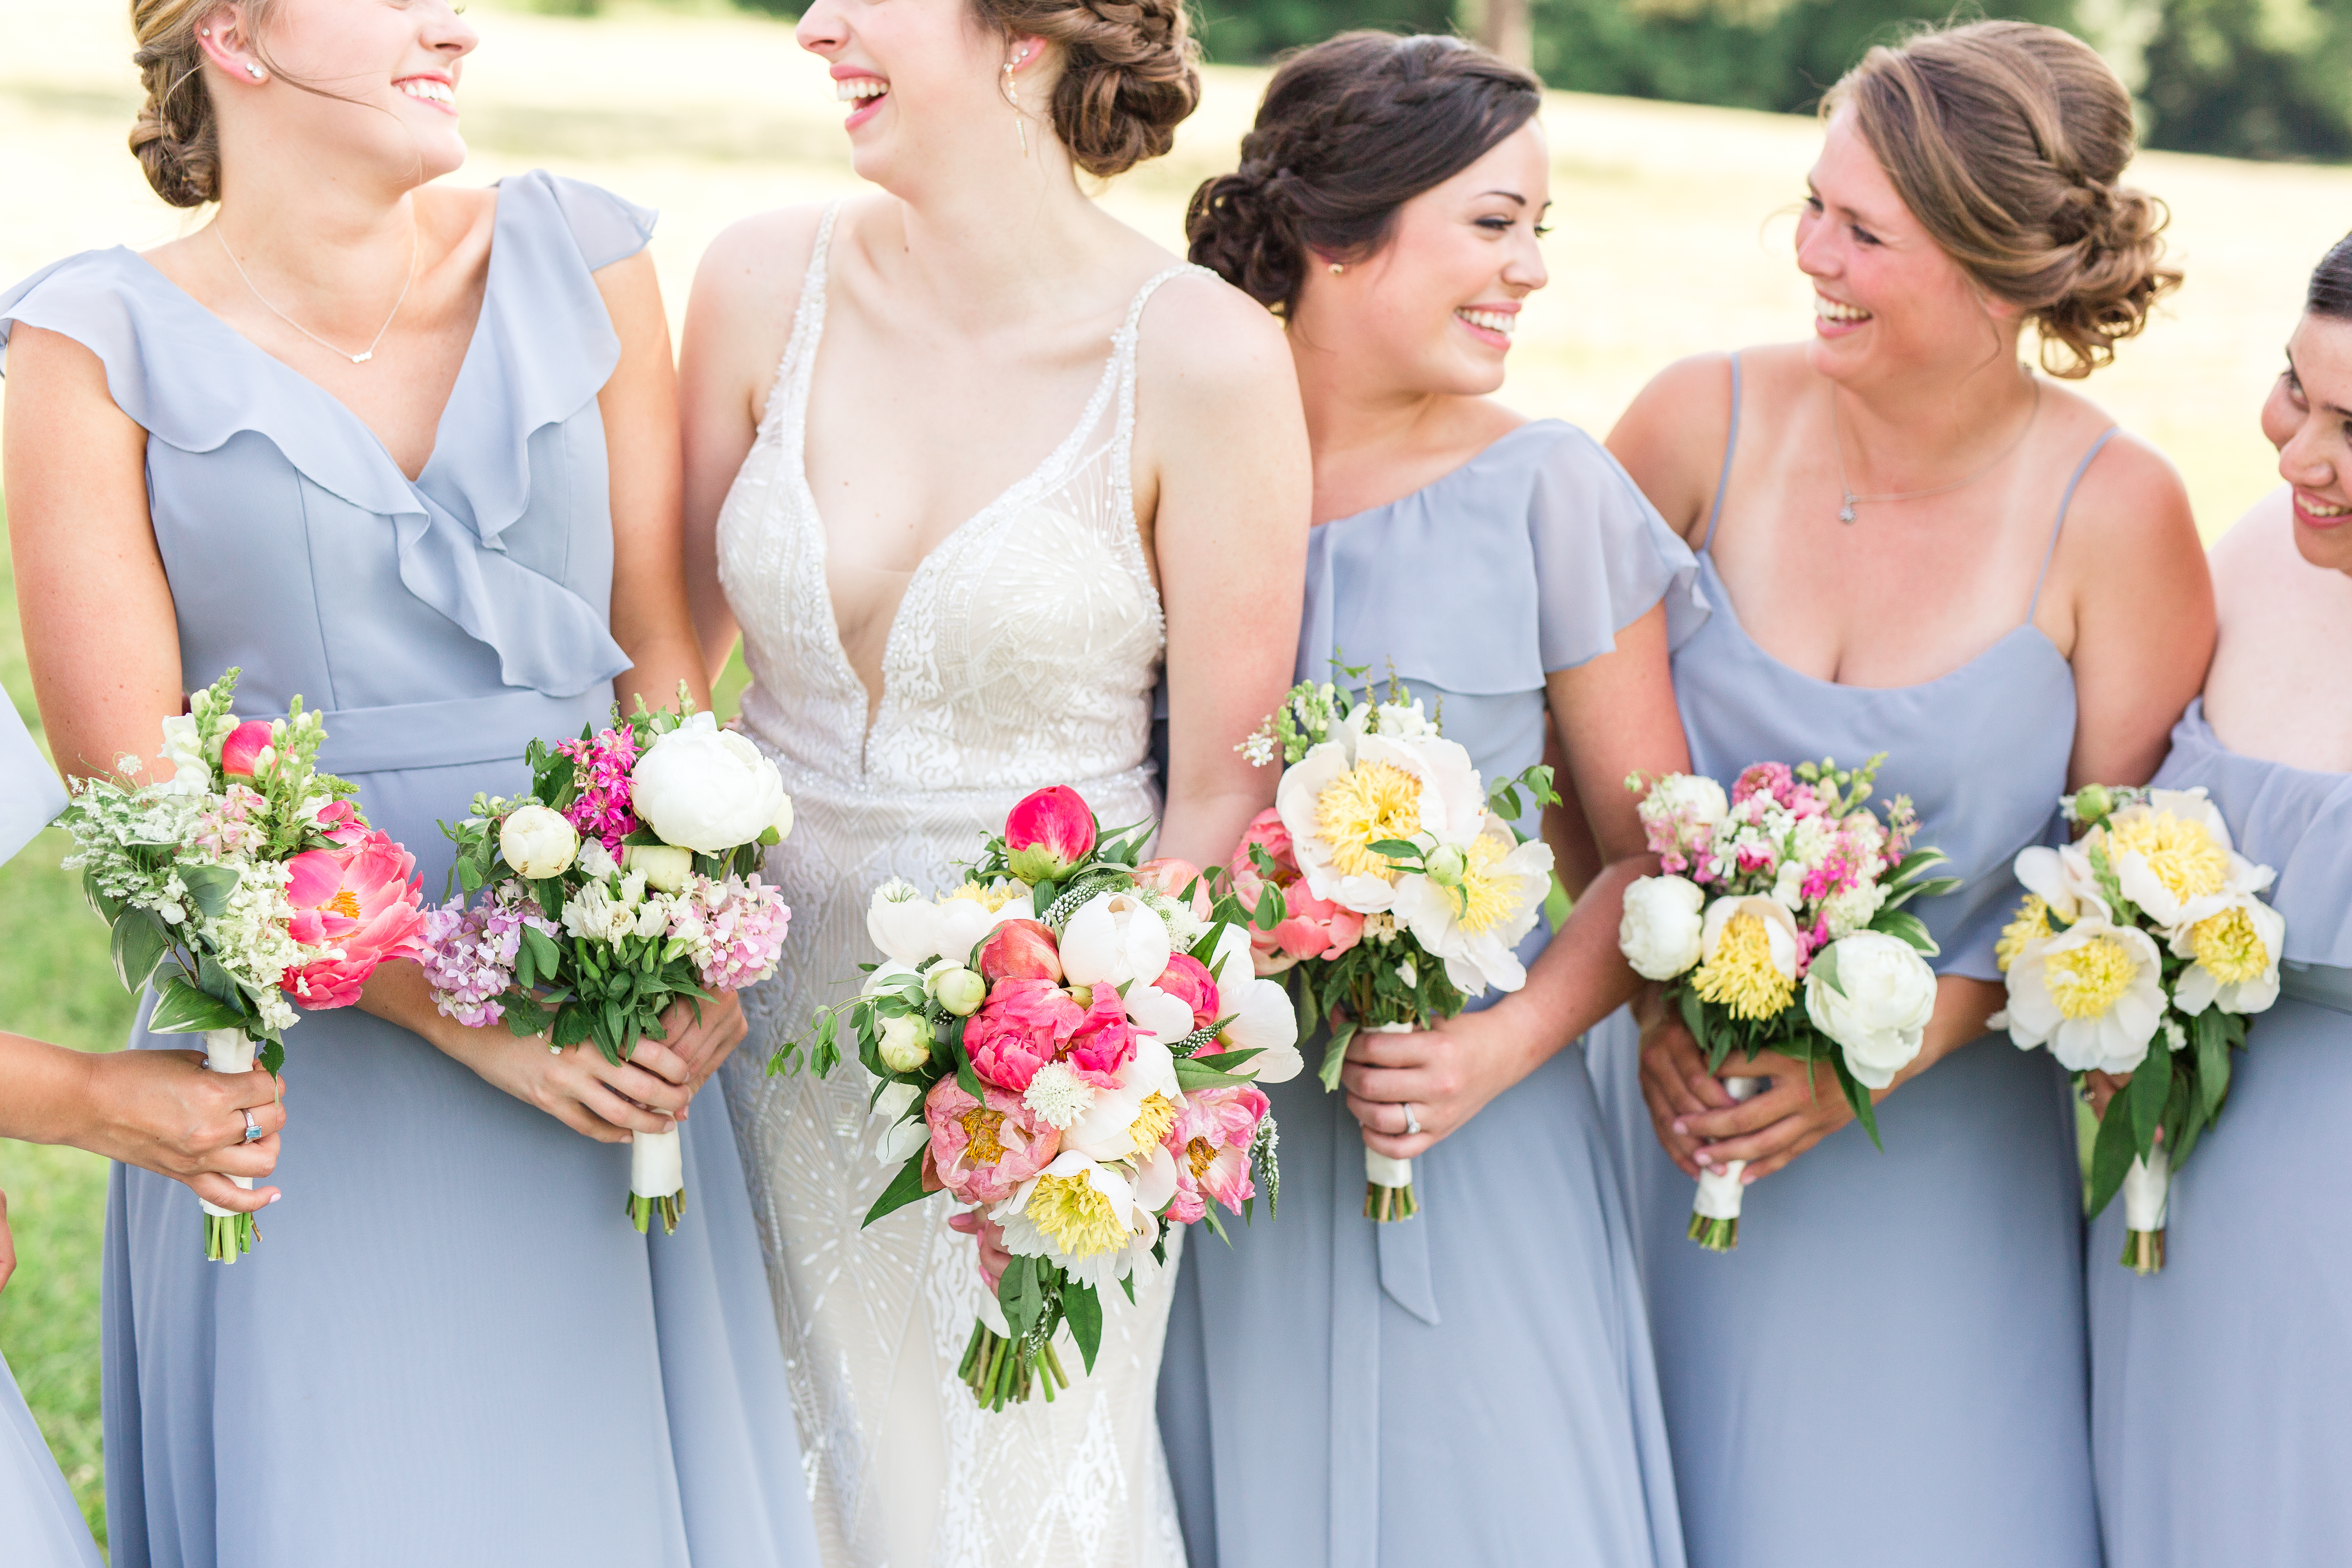 Bride and Bridesmaids in gray blue dresses with farm flowers